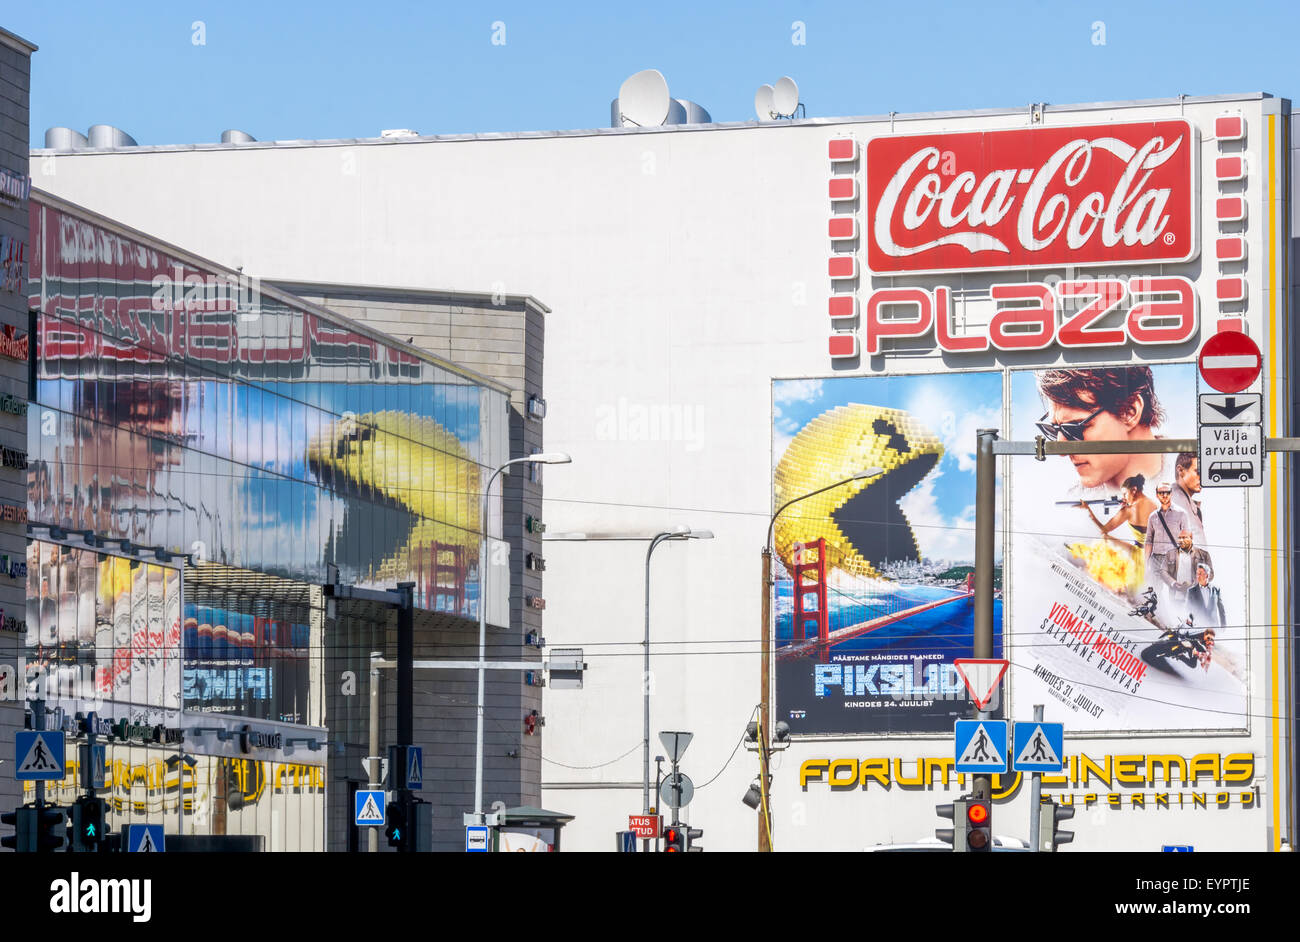 Tallinn, Estonia. 1st Aug, 2015. Pixels and Mission Impossible - Rogue Nation movies billboards on the Coca-Cola Plaza cinema in Tallinn. Pac-Man and Tom Cruise, Jeremy Renner, Simon Pegg, Rebecca Ferguson, Ving Rhames and Alec Baldwin are seen in the billboards. Credit:  Sergey Hmelevskih/Alamy Live News Stock Photo